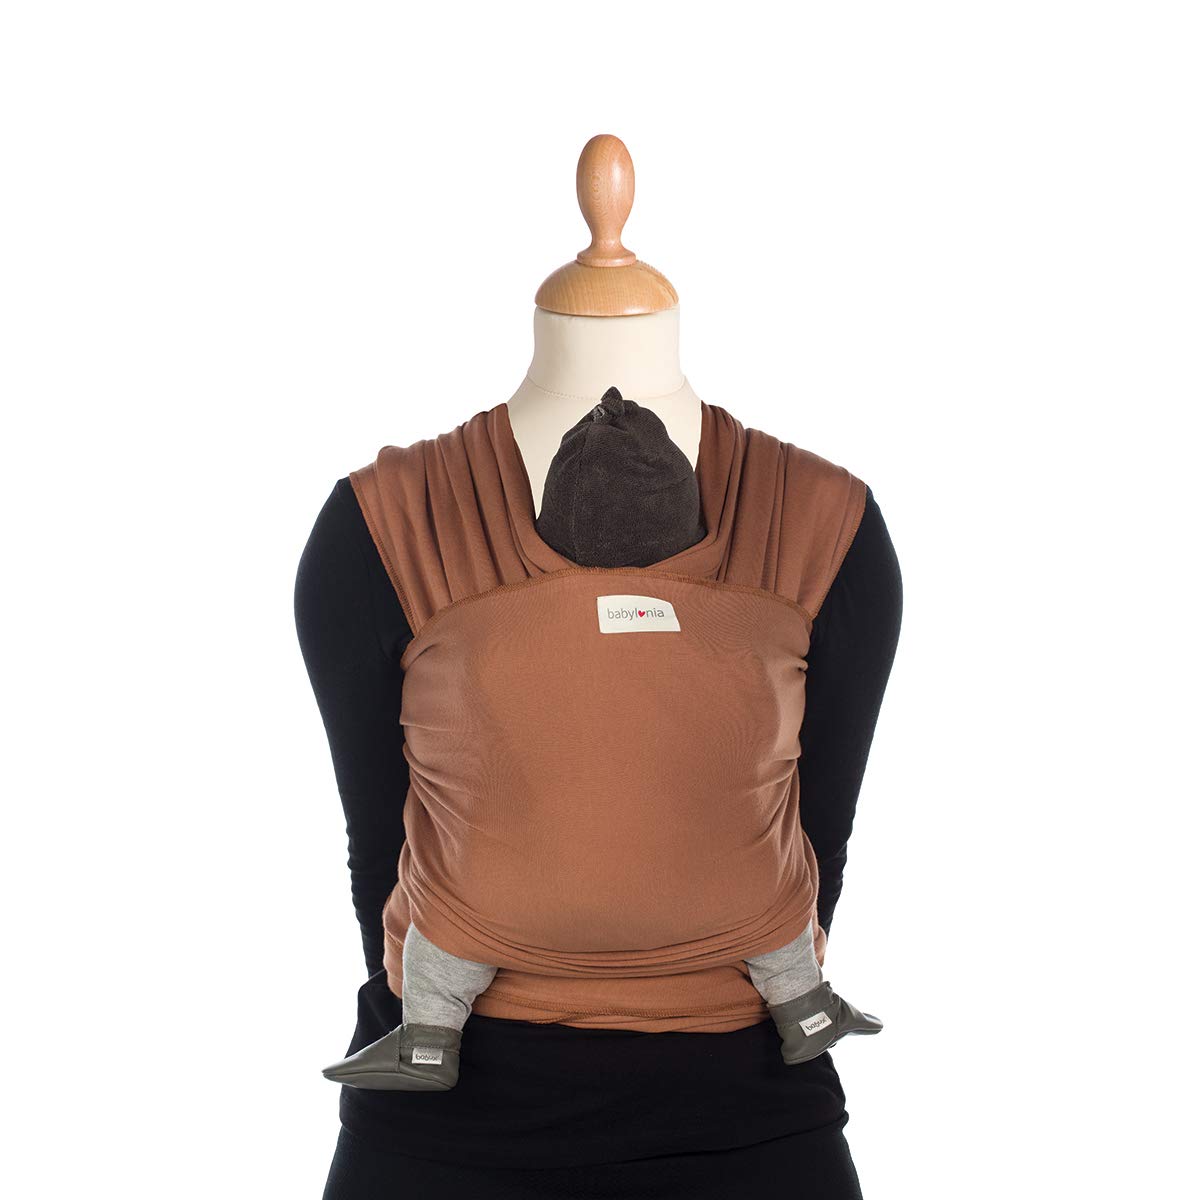 Babylonia Baby sling, one size fits all